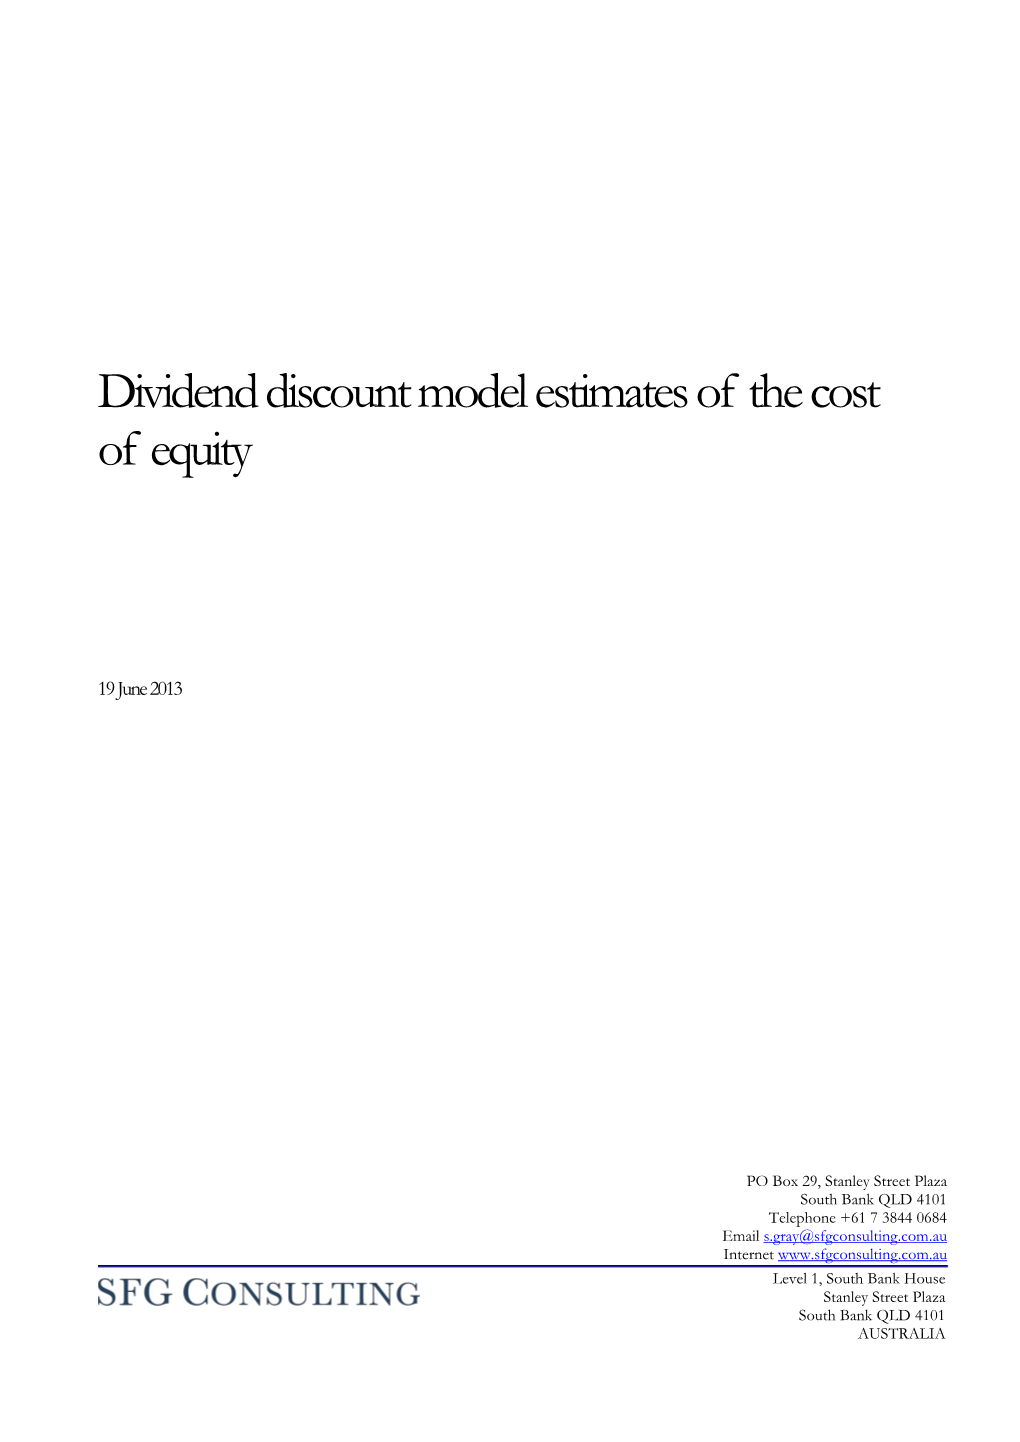 Dividend Discount Model Estimates of the Cost of Equity